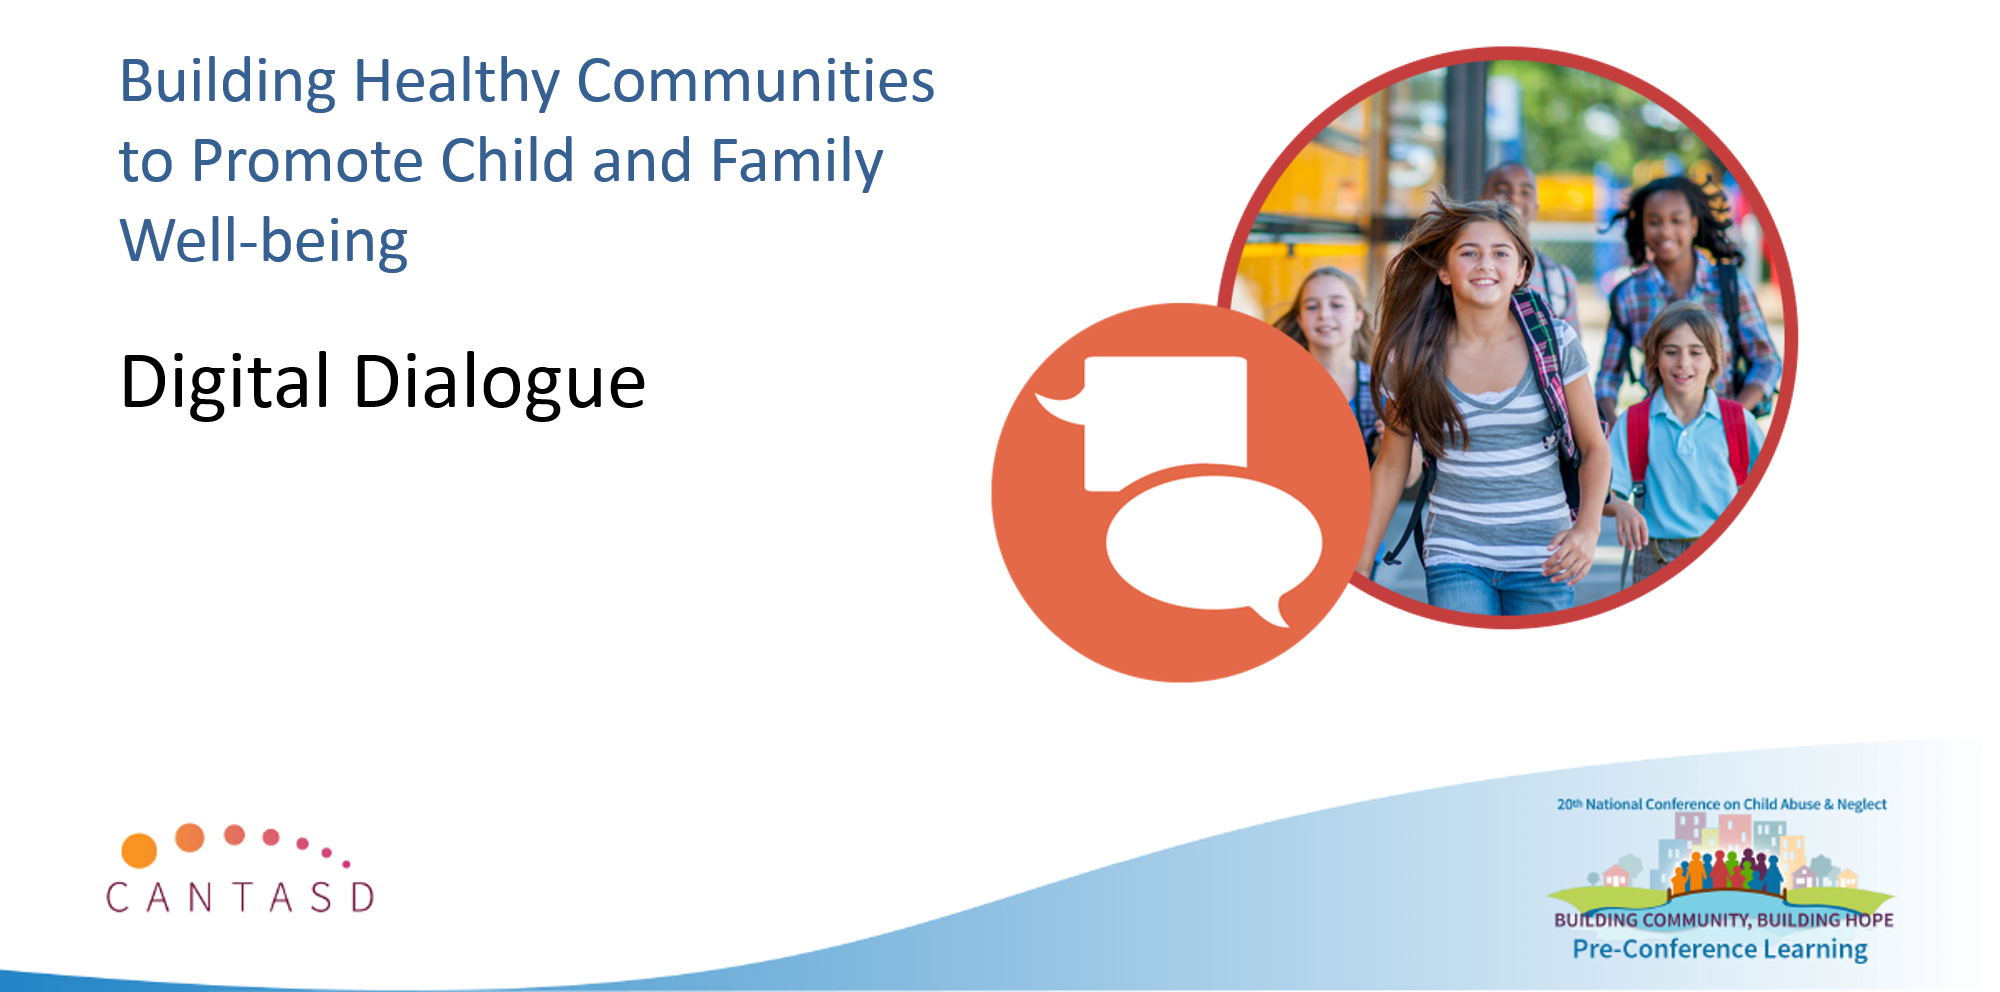 Building Healthy Communities to Promote Child and Family Well-being - This link opens in a new window.